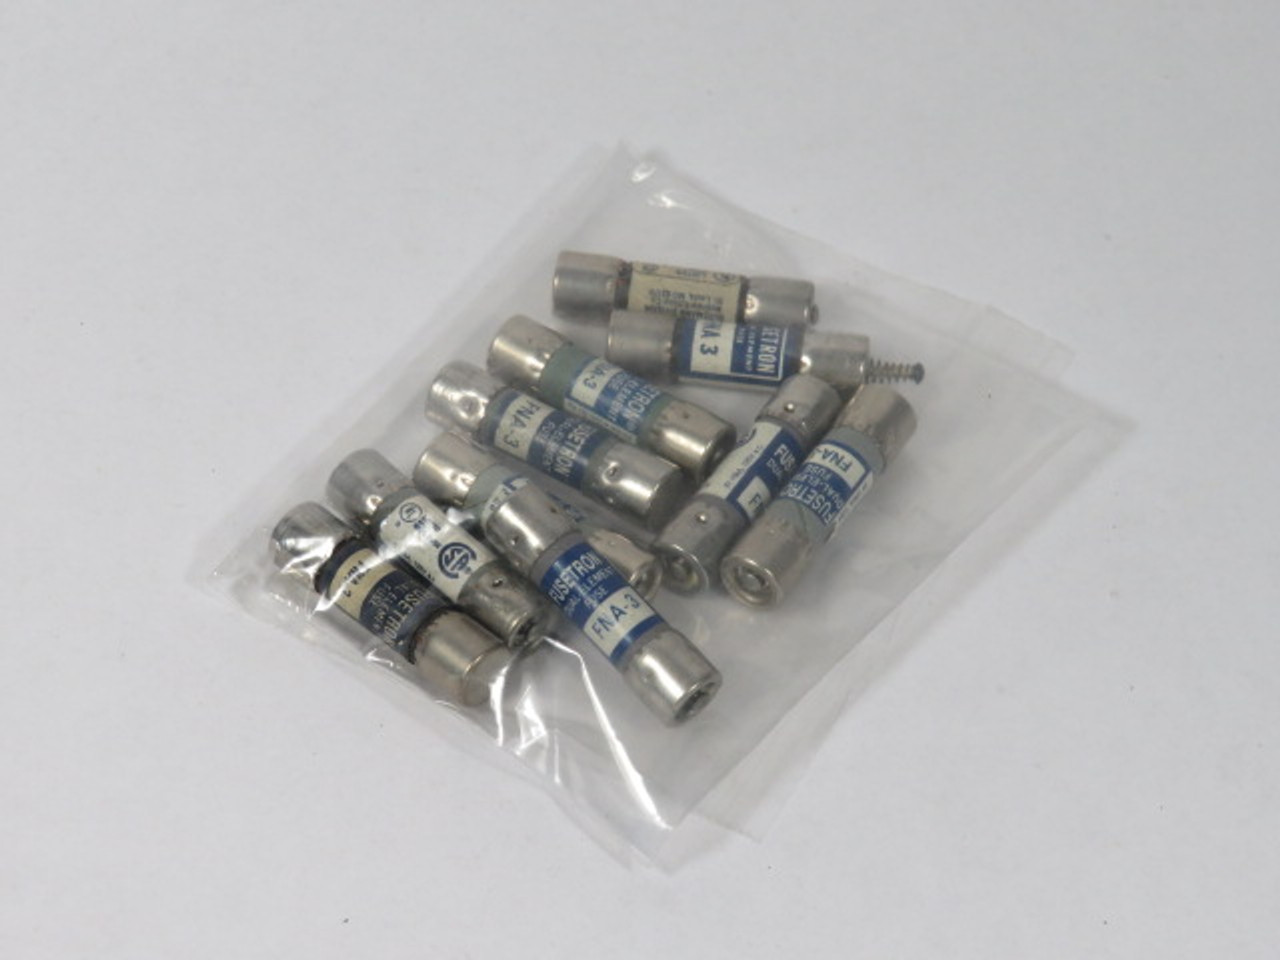 Fusetron FNA-3 Dual Element Fuse 3A 125V Lot of 10 USED